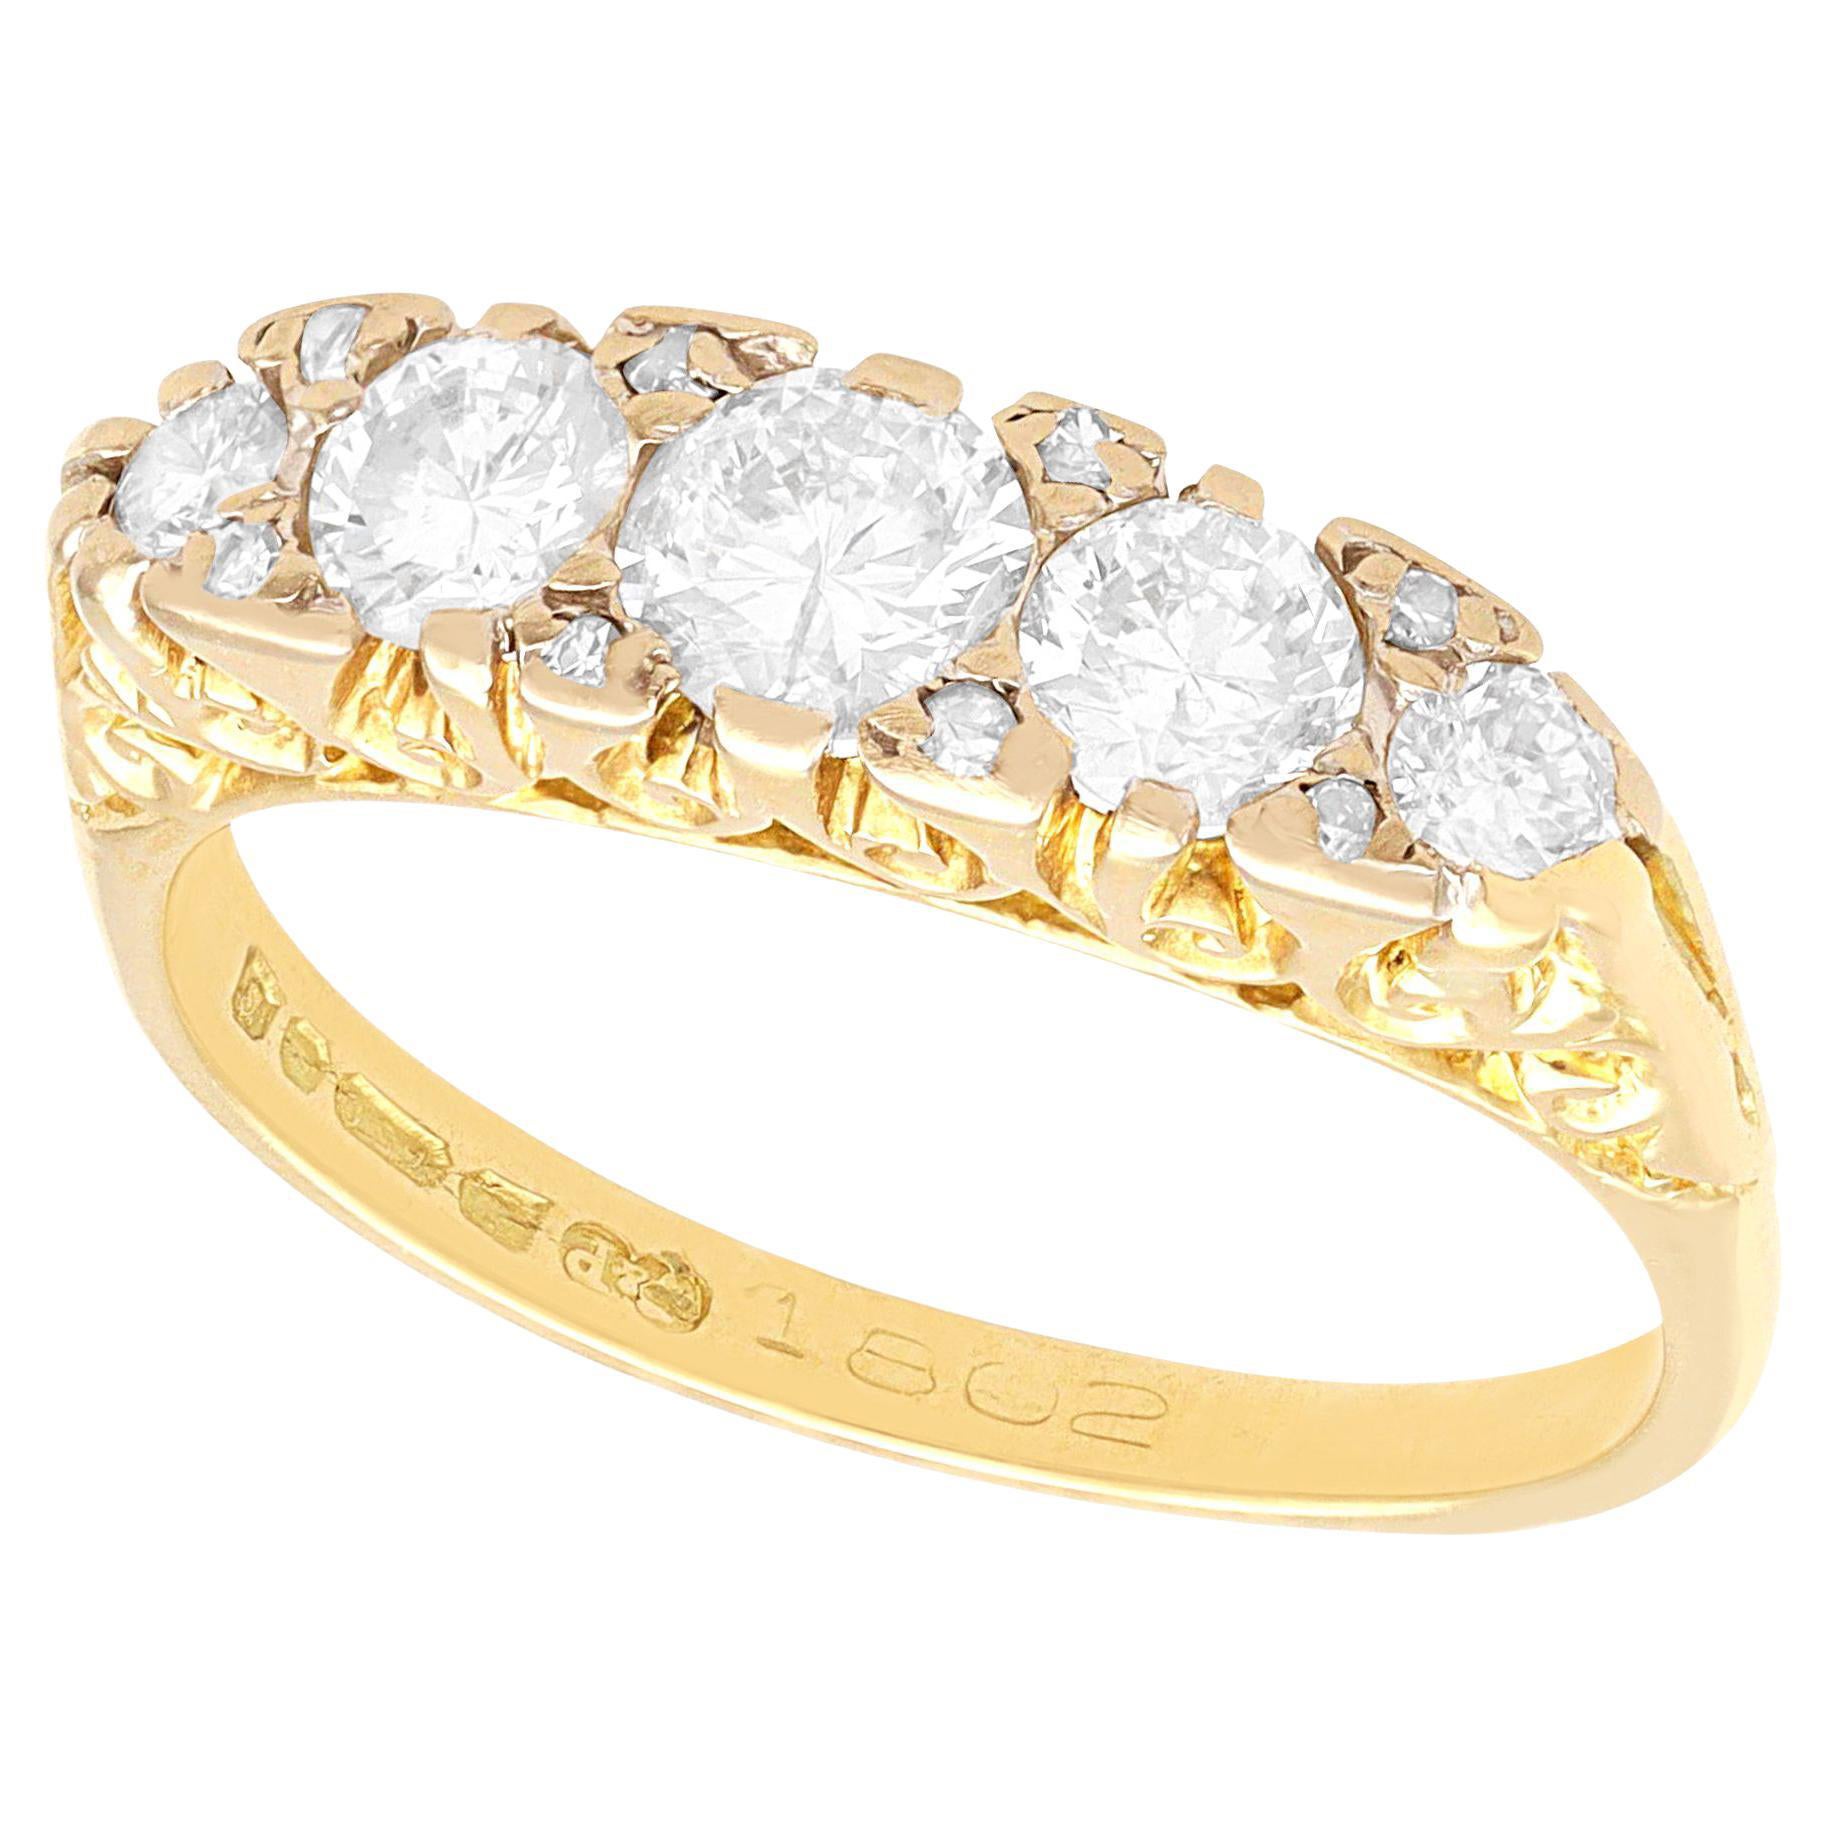 1.10 Carat Diamond and 18k Yellow Gold Five Stone Ring For Sale